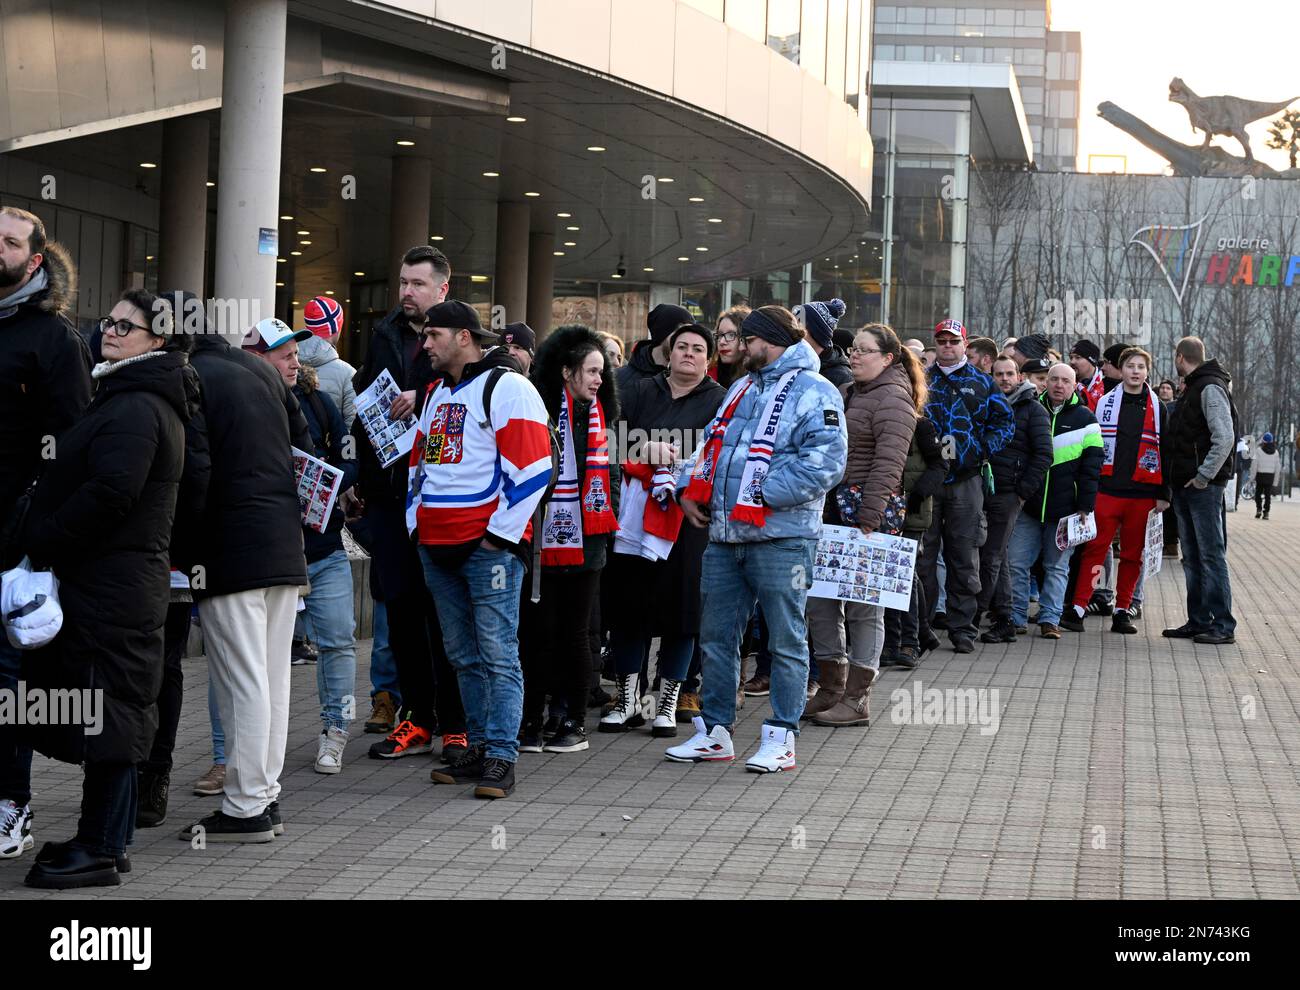 Prague, Czech Republic. 10th Feb, 2023. People before the hockey match of legends Czech Republic vs Slovakia in Prague, Czech Republic, February 10, 2023. The match is part of the celebration of the 25th anniversary of the Czech team's victory at the 1998 Winter Olympic Games in Nagano. Credit: Michal Kamaryt/CTK Photo/Alamy Live News Stock Photo